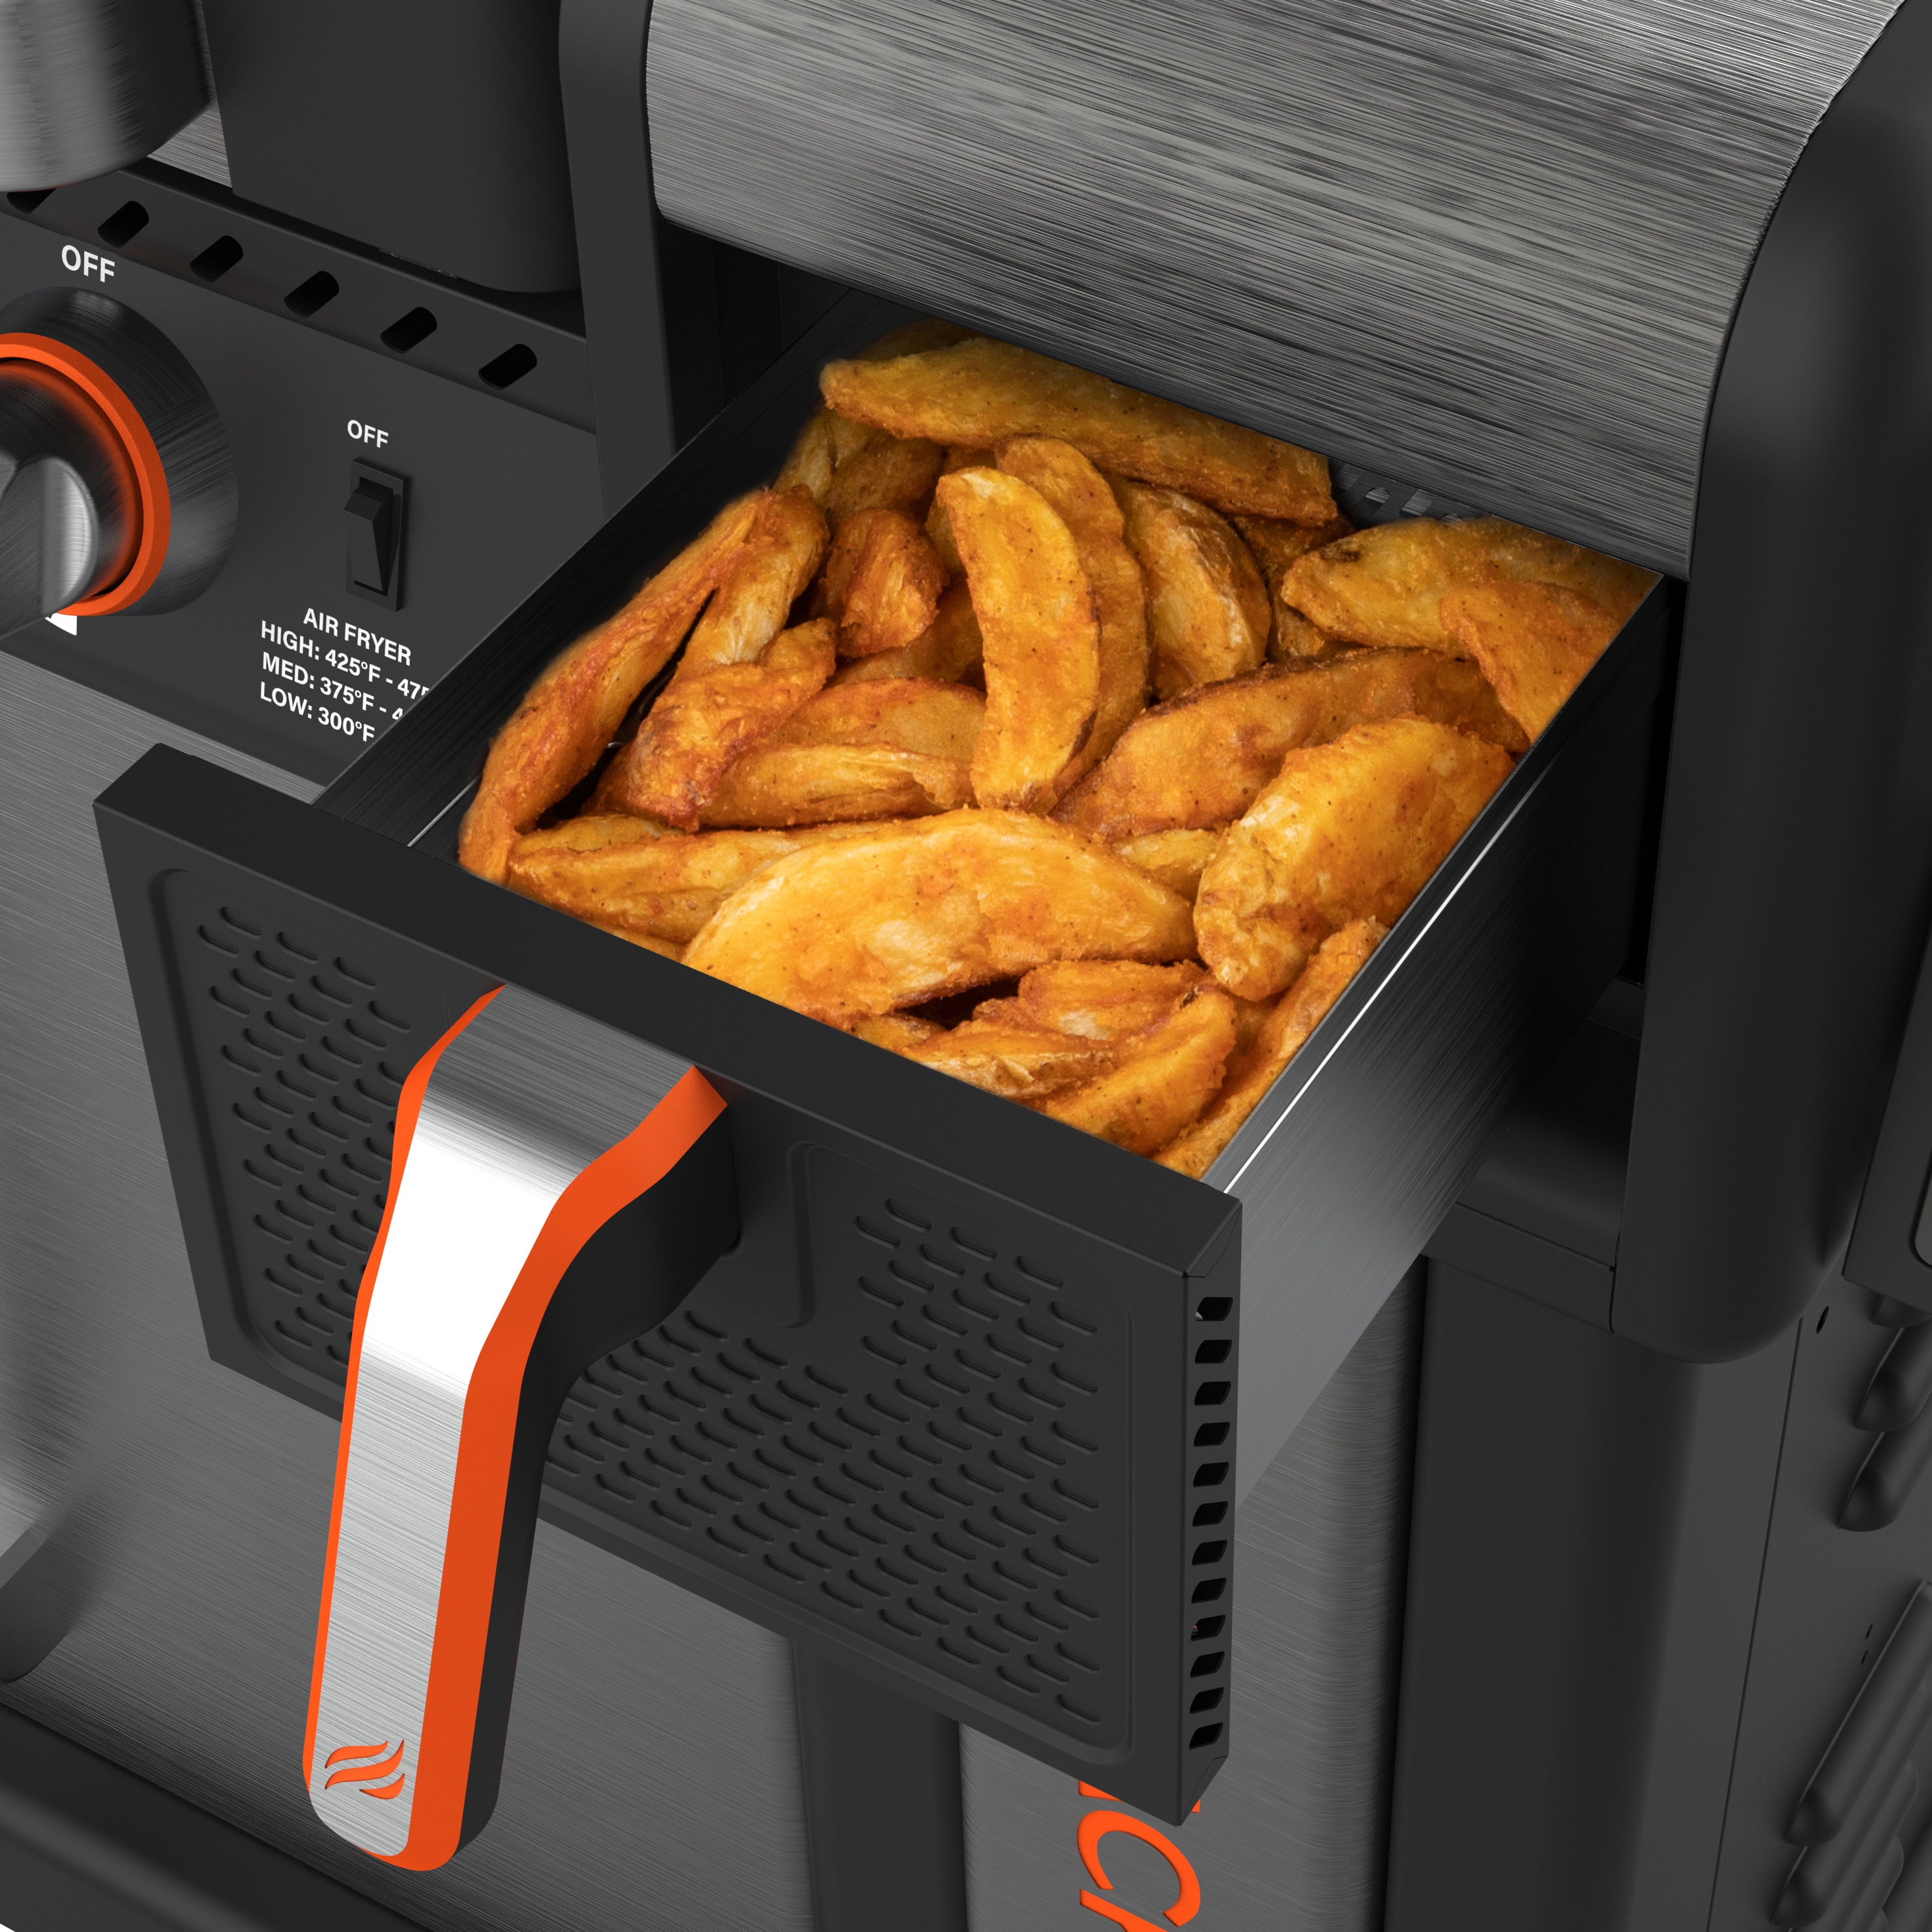 Masterbuilt - Air fryer, but make it outdoors. Meet the new 7-in-1 Outdoor  Air Fryer, large enough to fit a 20 lb. turkey, available exclusively at  Walmart. Learn more